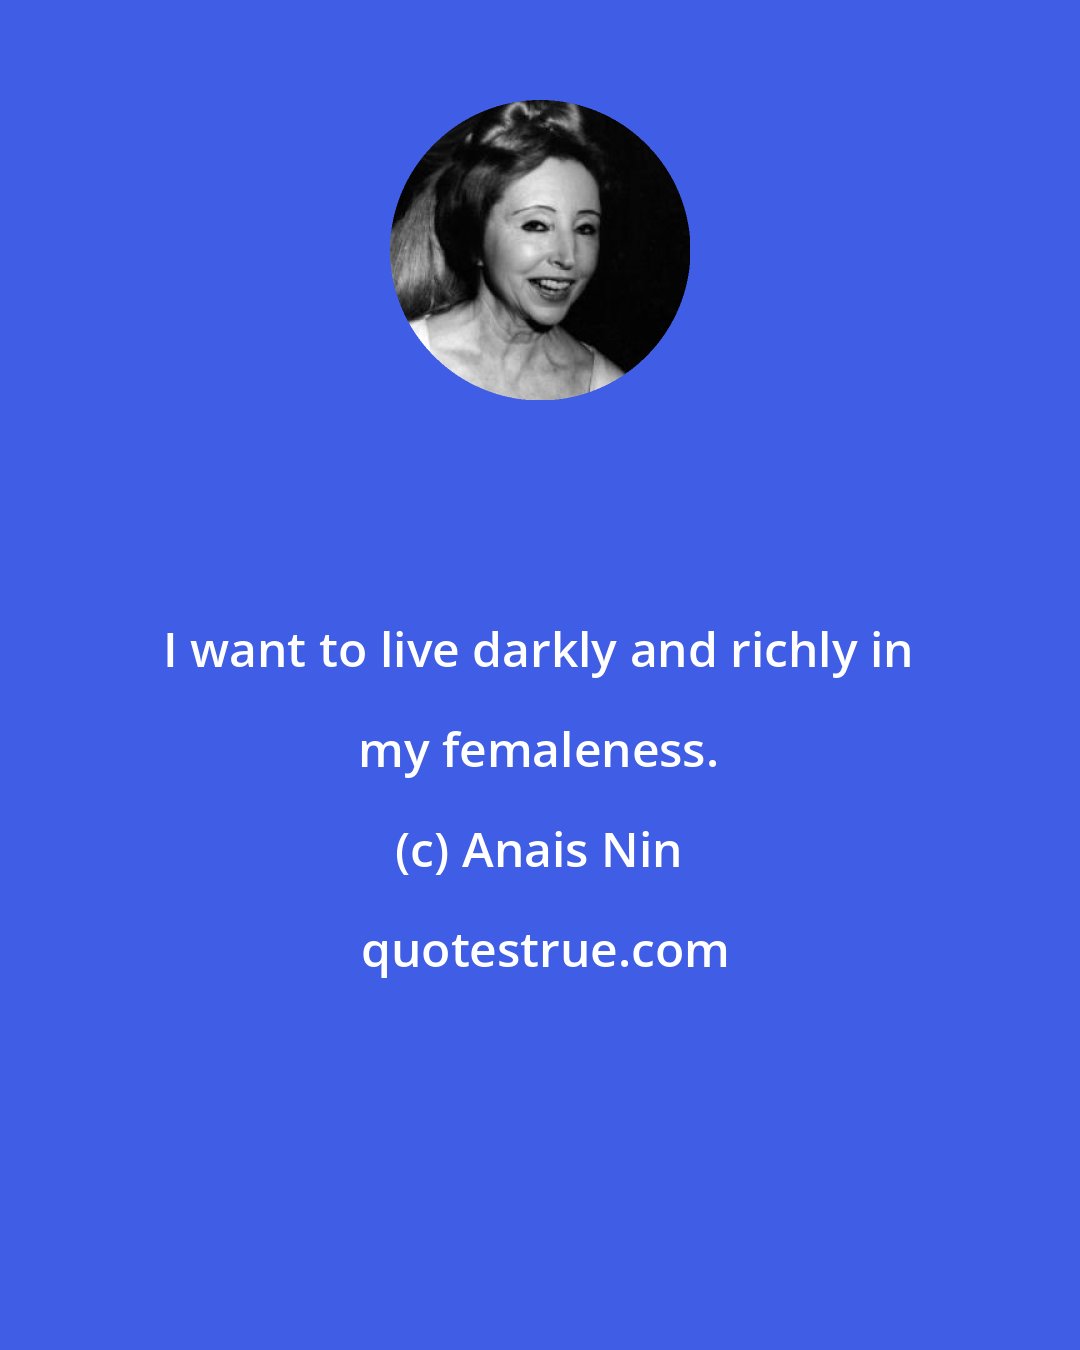 Anais Nin: I want to live darkly and richly in my femaleness.